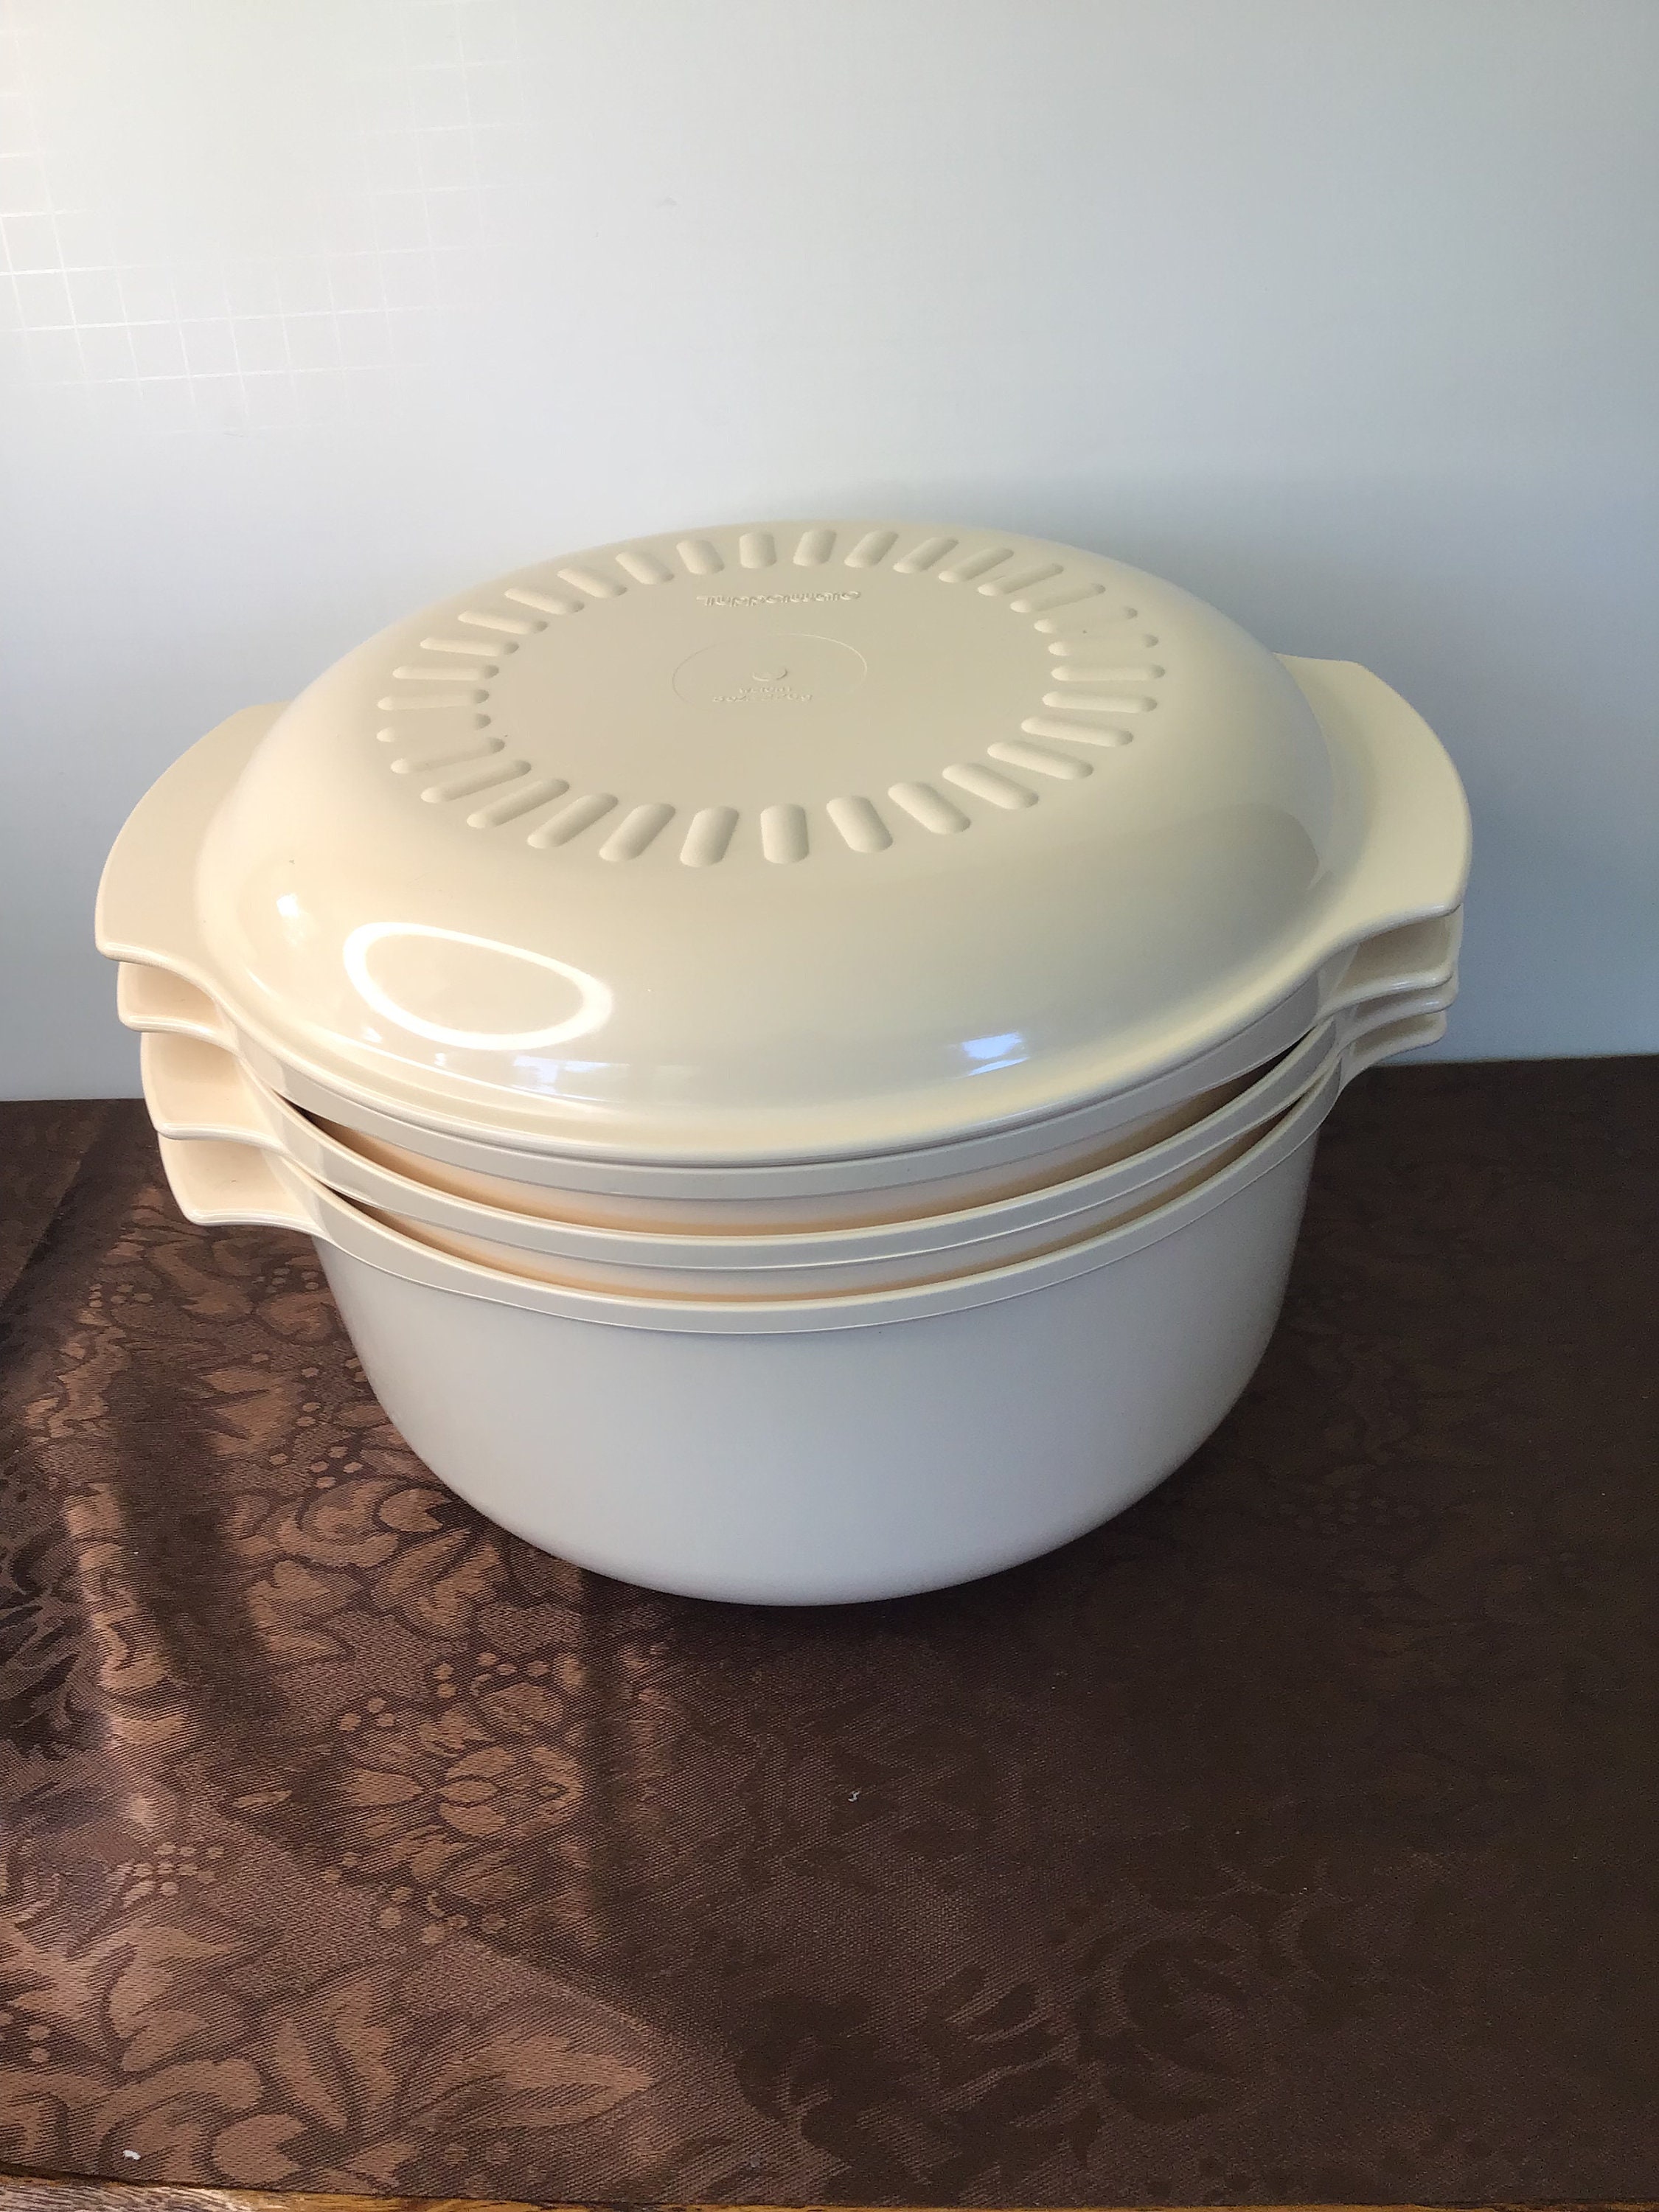 Vintage 5 Piece TUPPERWARE Microwave Stack Cooker Almond 